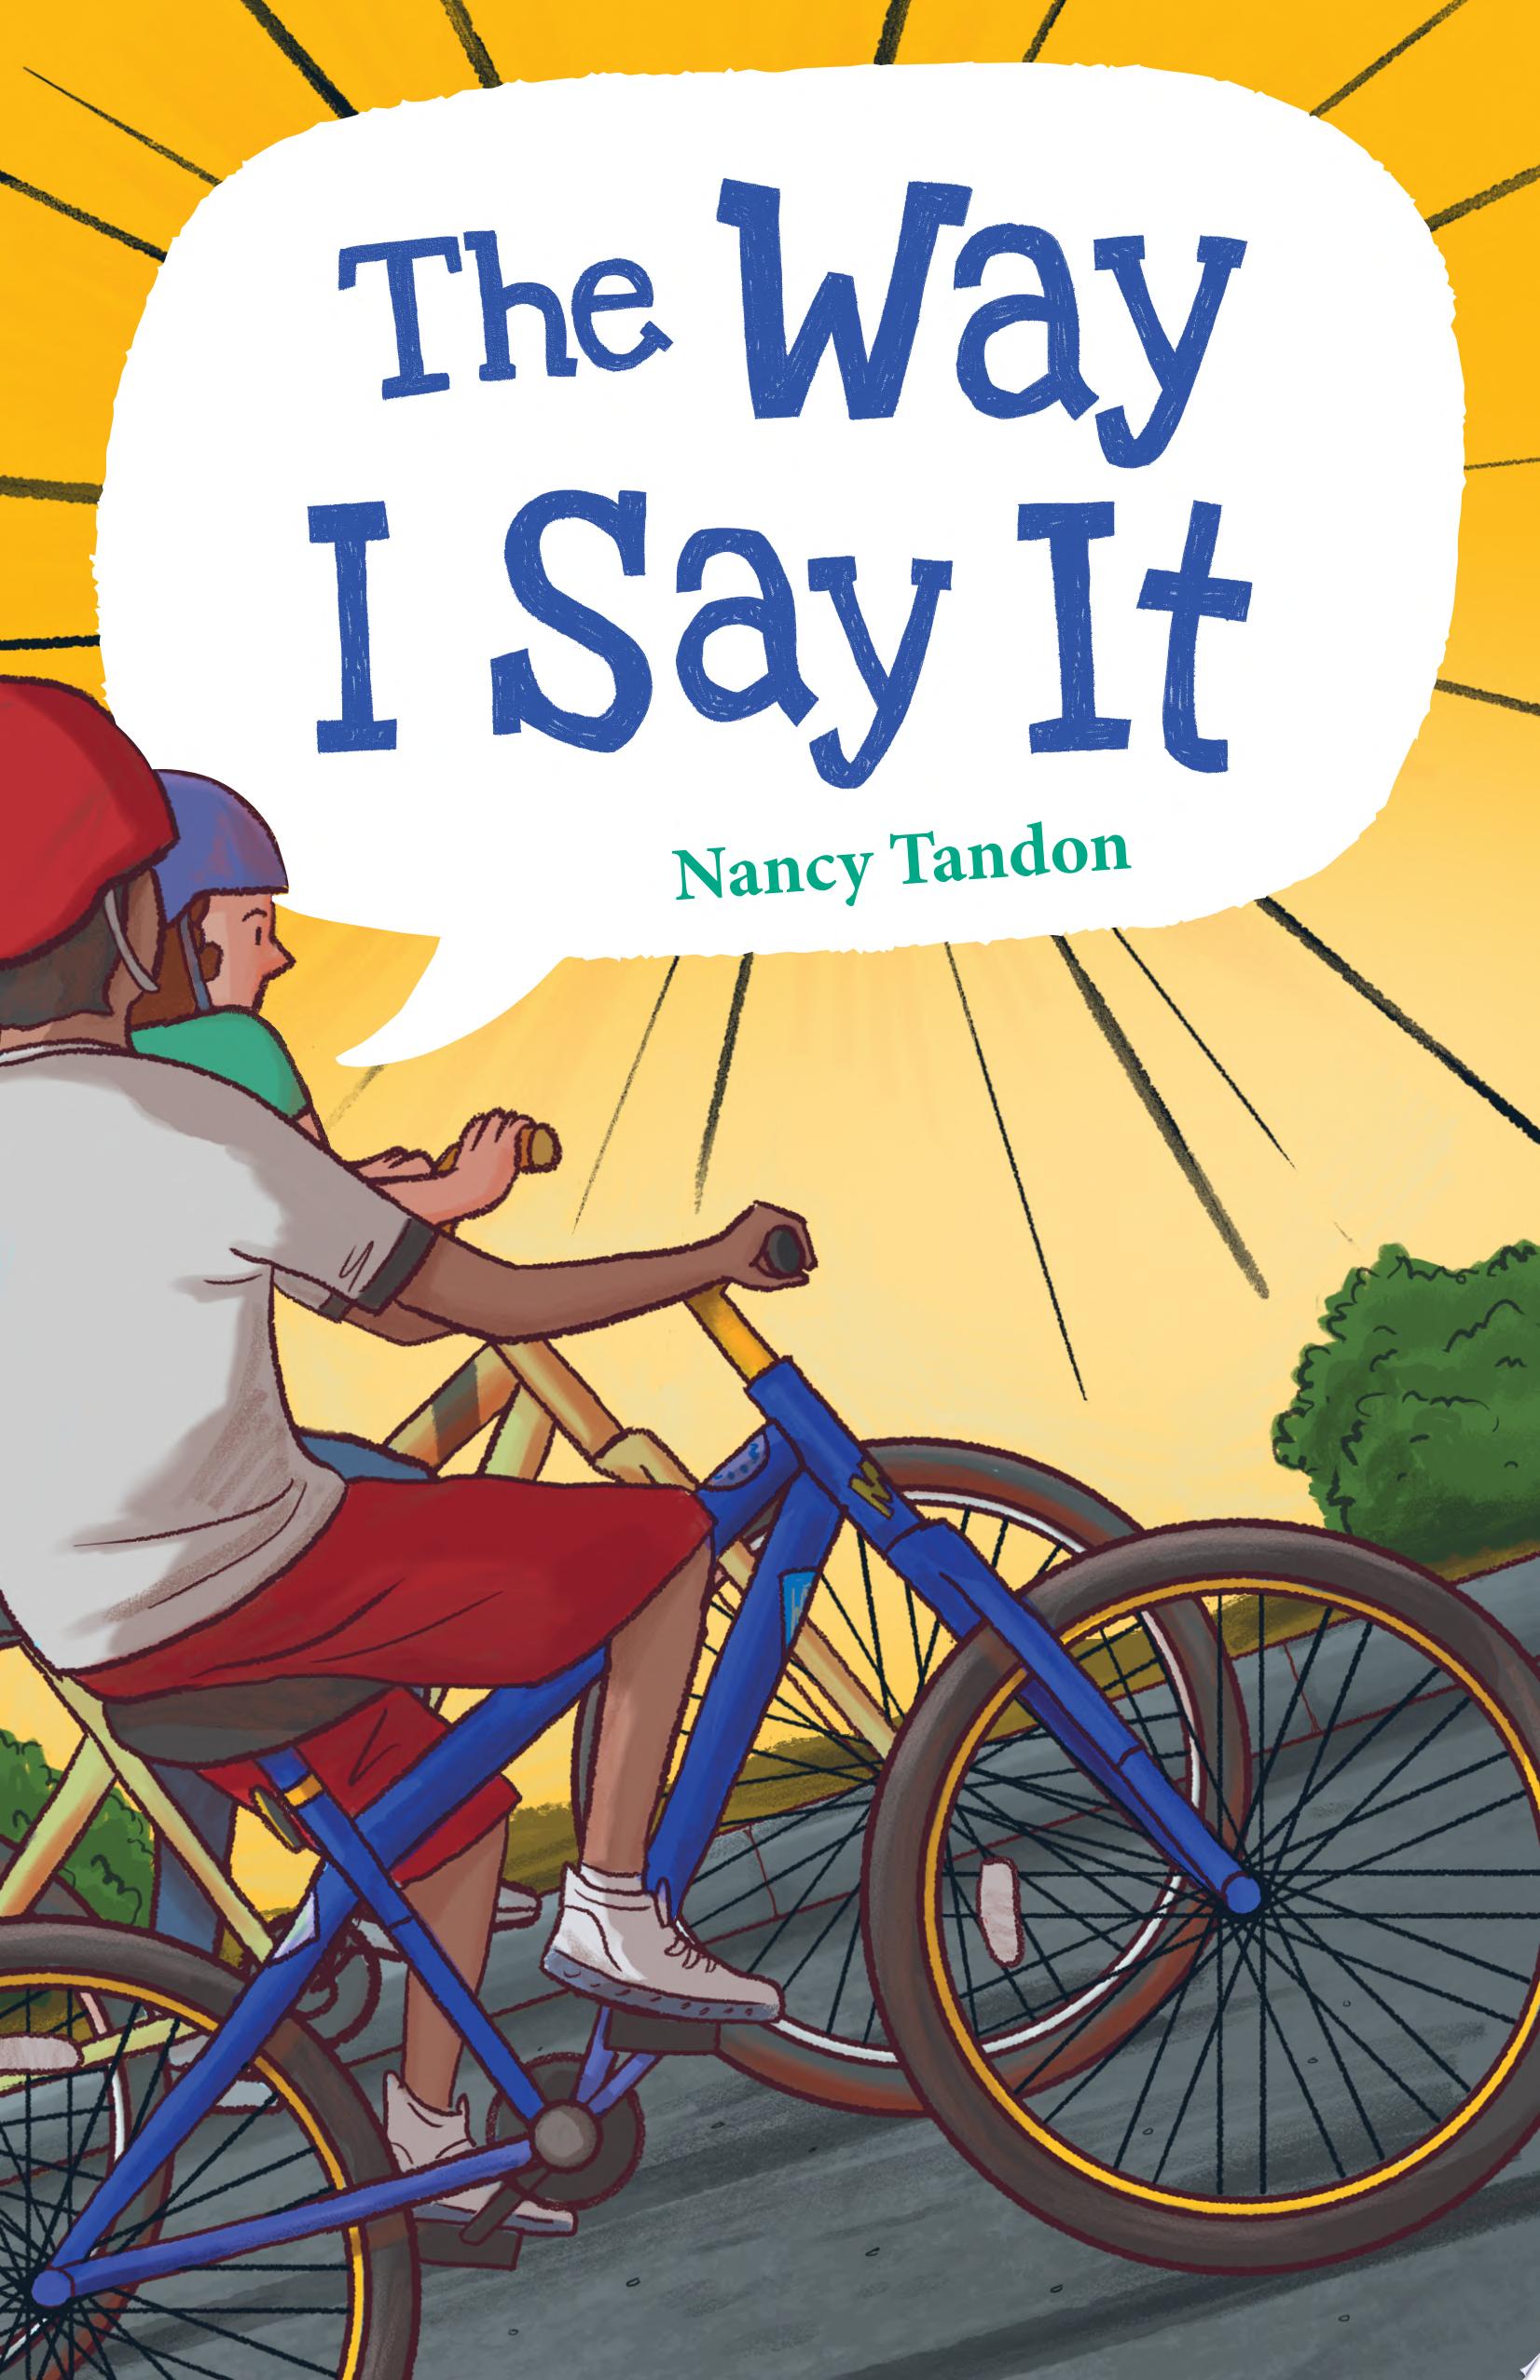 Image for "The Way I Say It"